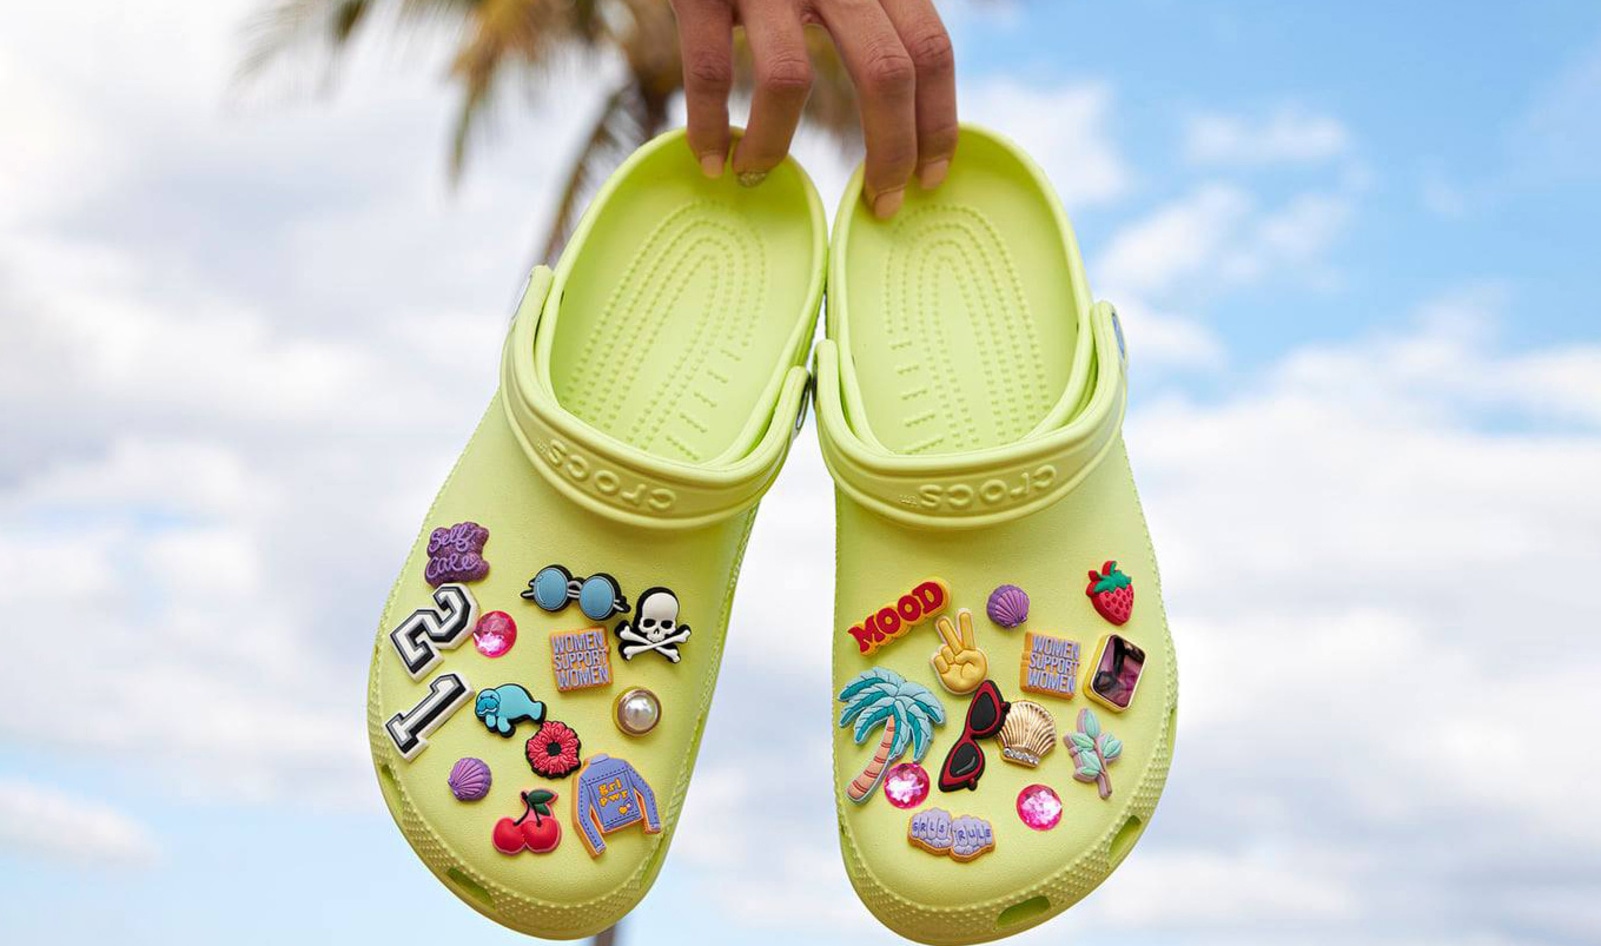 Shoe Brand Crocs Is Officially Going Vegan to Fight Climate Change